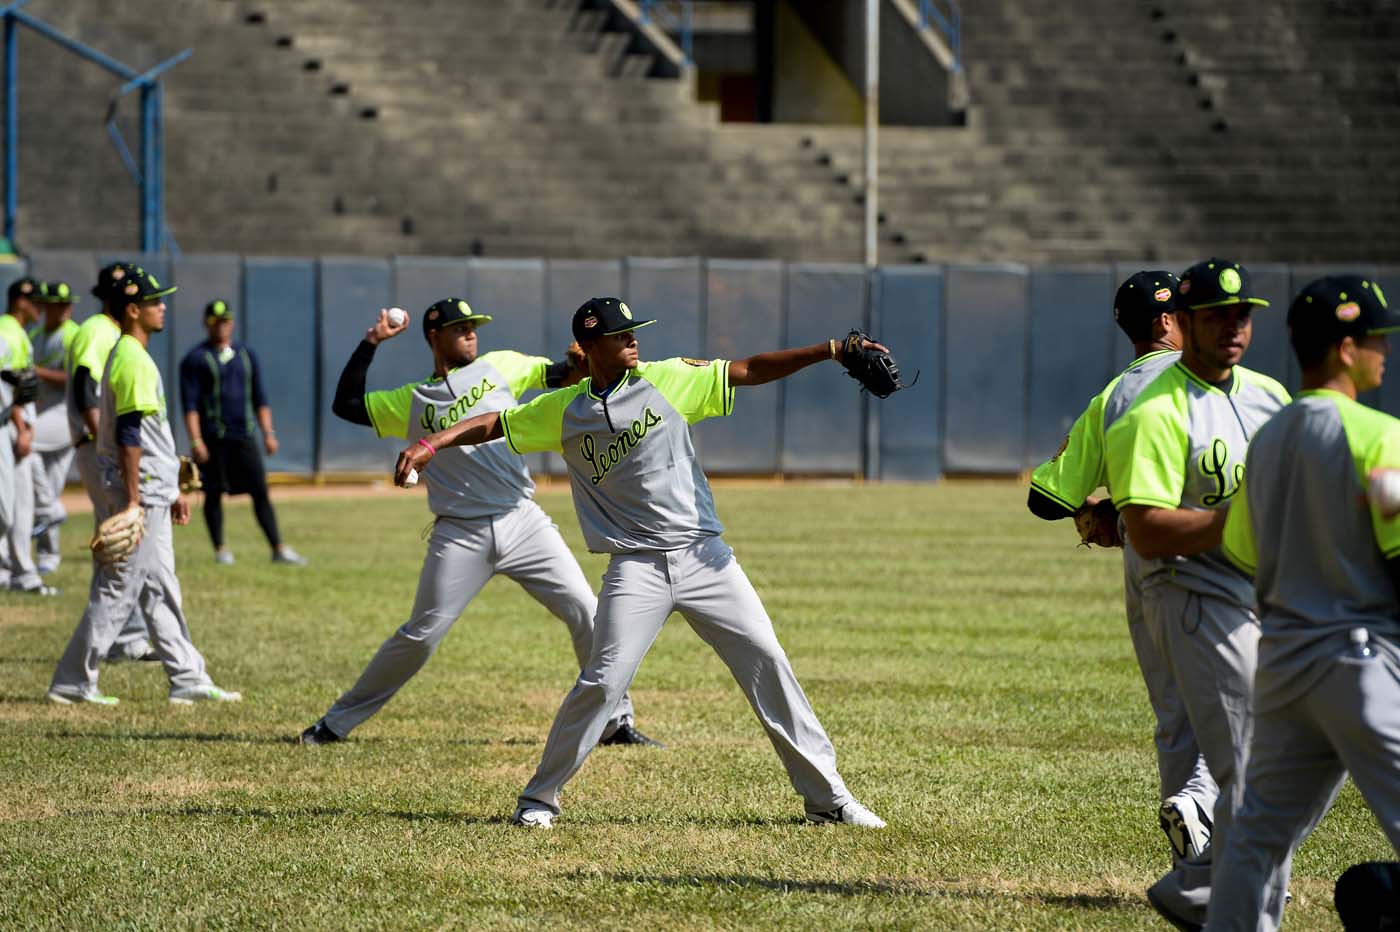 Players of the Venezuelan baseball team Leones del Caracas attend a training session at the Universitario stadium in Caracas, on September 18, 2017. While baseball is Venezuela's national sport, some fans are angry that the government, given the severity of the economic crisis and the political tension, will spend nearly ten million dollars on organizing the upcoming Winter League rather than on imports of food and medicine. / AFP PHOTO / FEDERICO PARRA